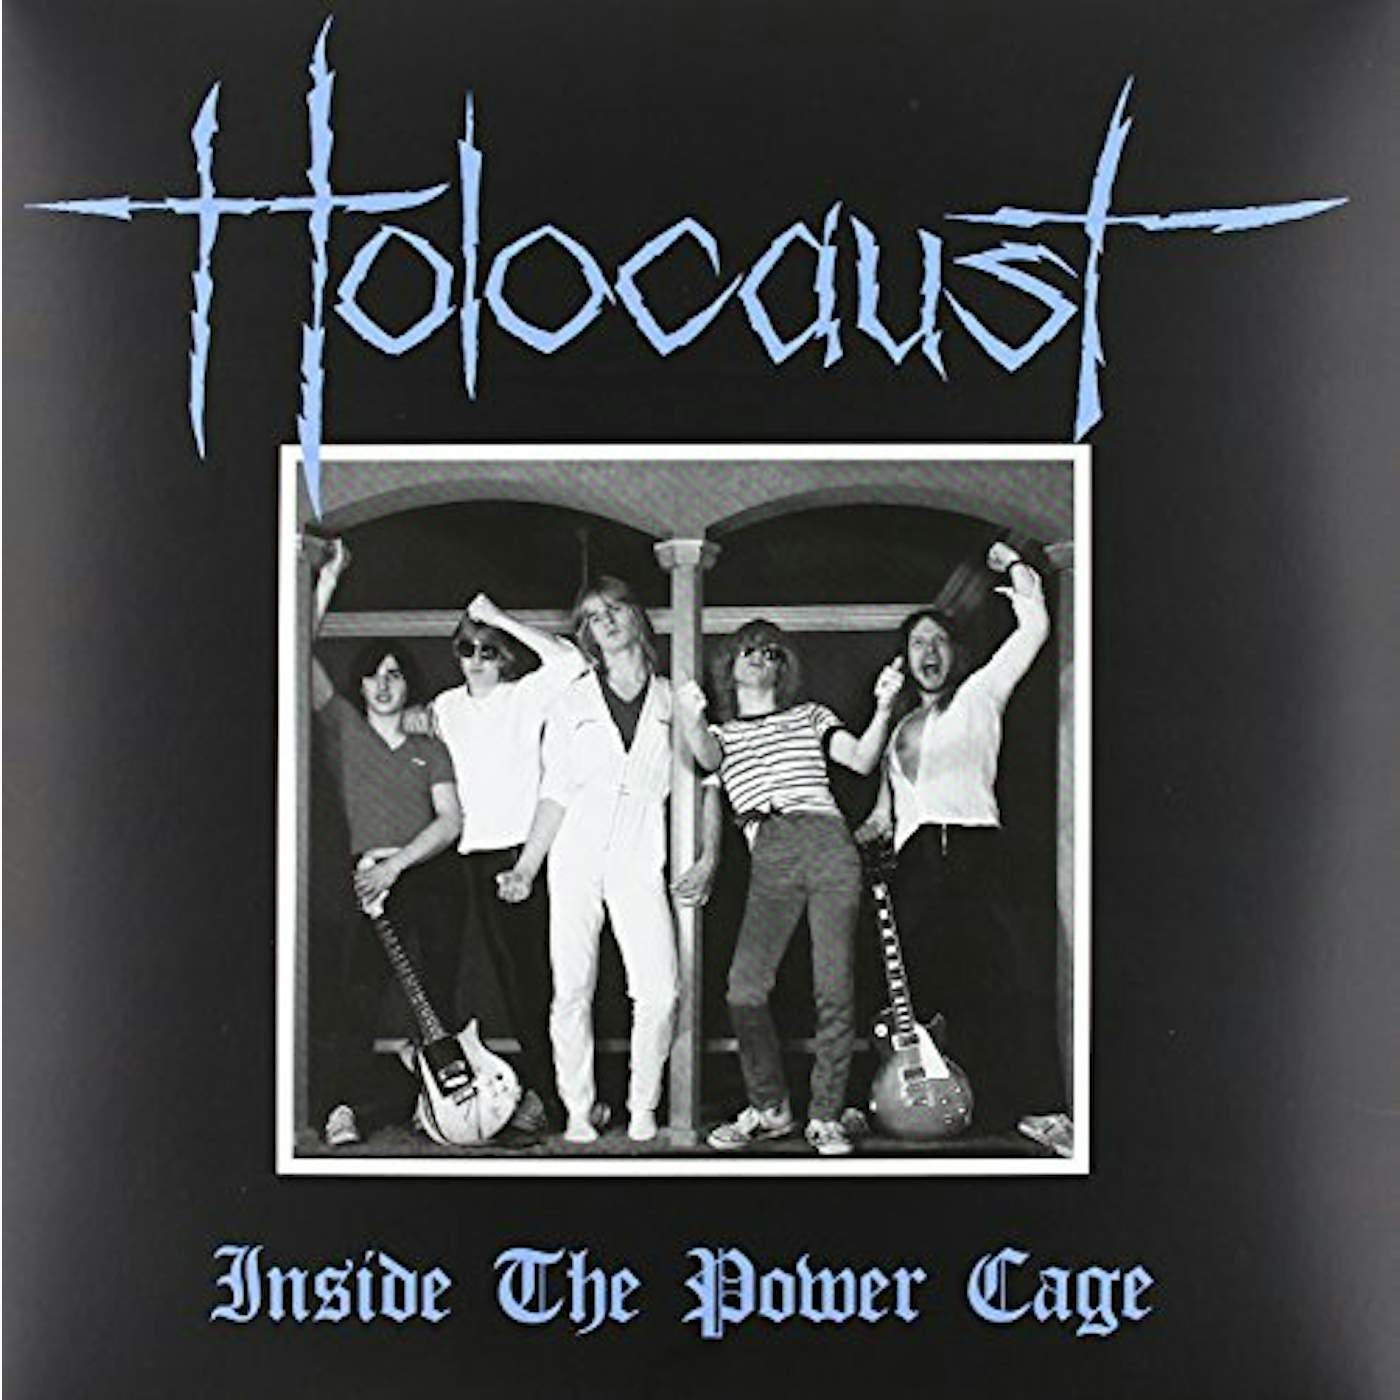 Holocaust INSIDE THE POWER CAGE (BLOOD RED VINYL) Vinyl Record